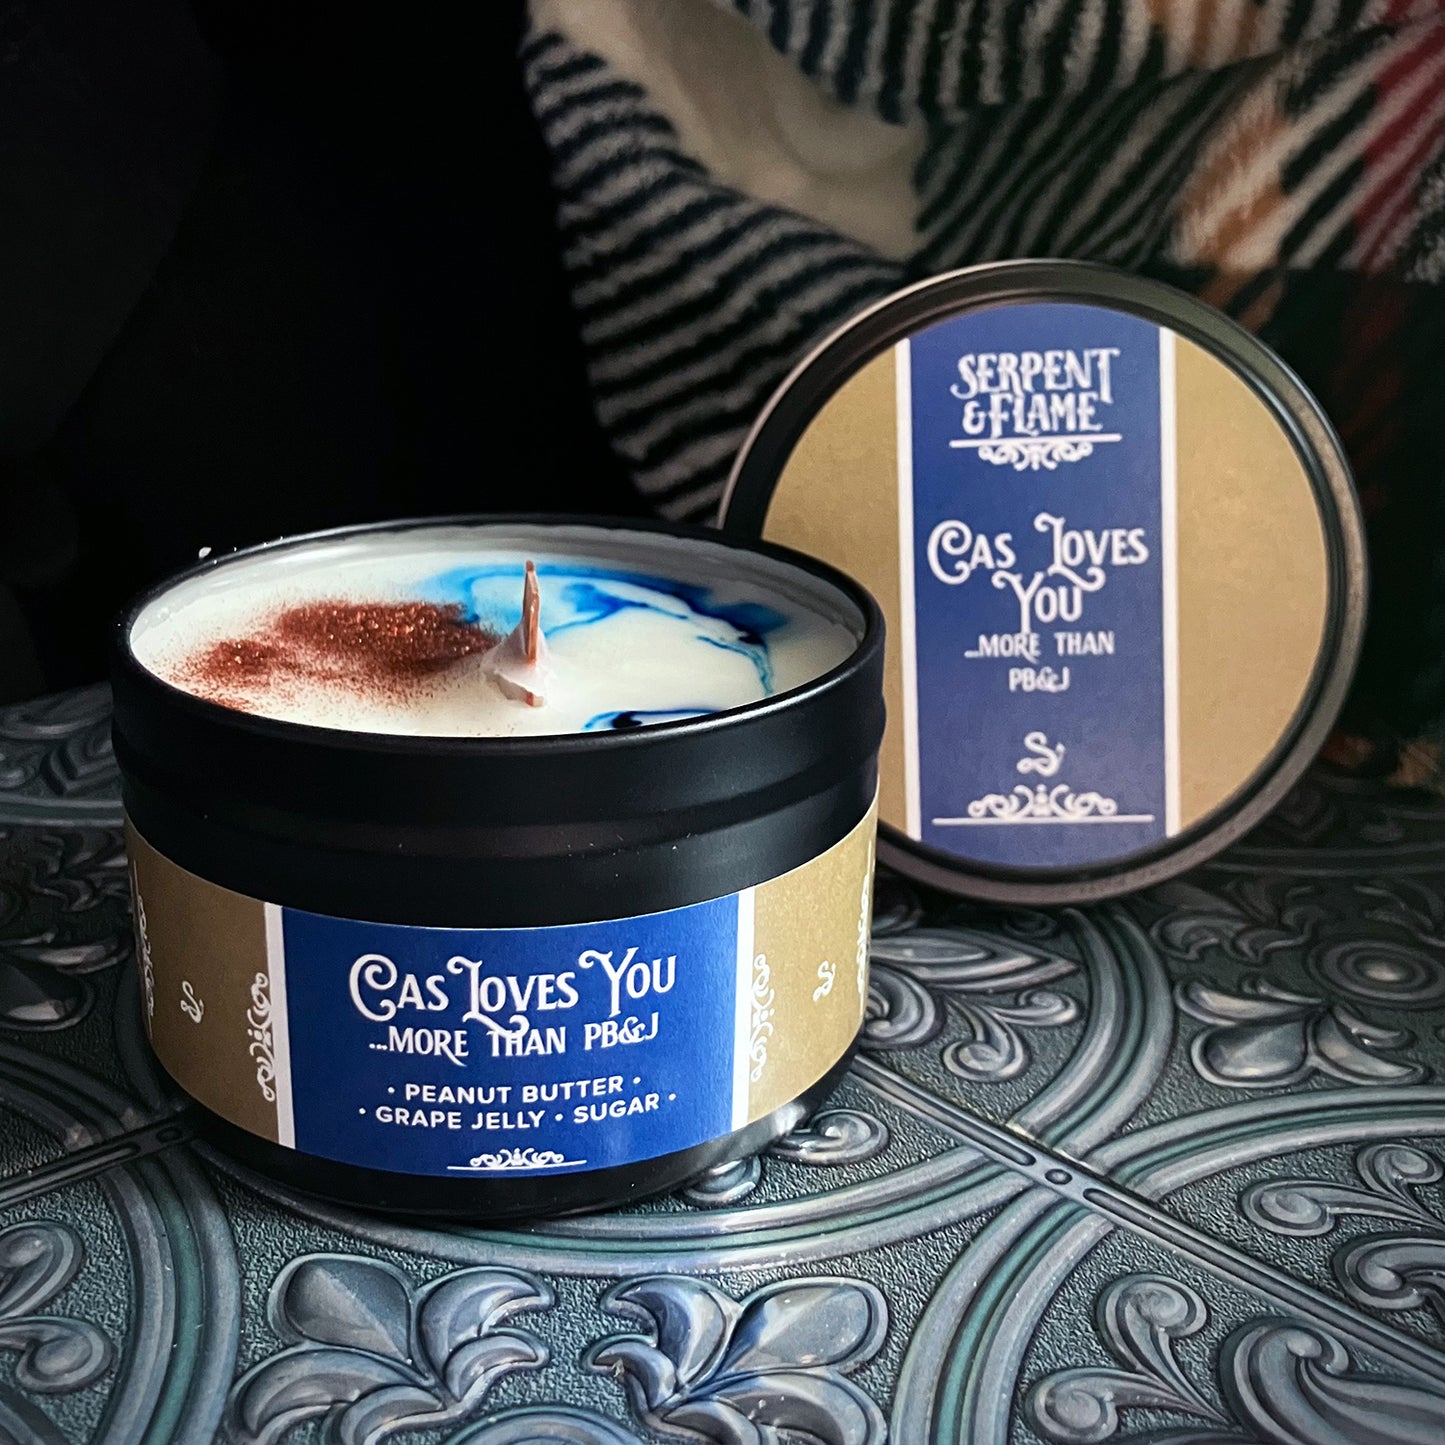 A black candle tin containing a white candle with a blue swirl and copper candle-safe glitter. The blue-and-tan label reads "Cas Loves You...More Than PB&J. Peanut butter / grape jelly / sugar"